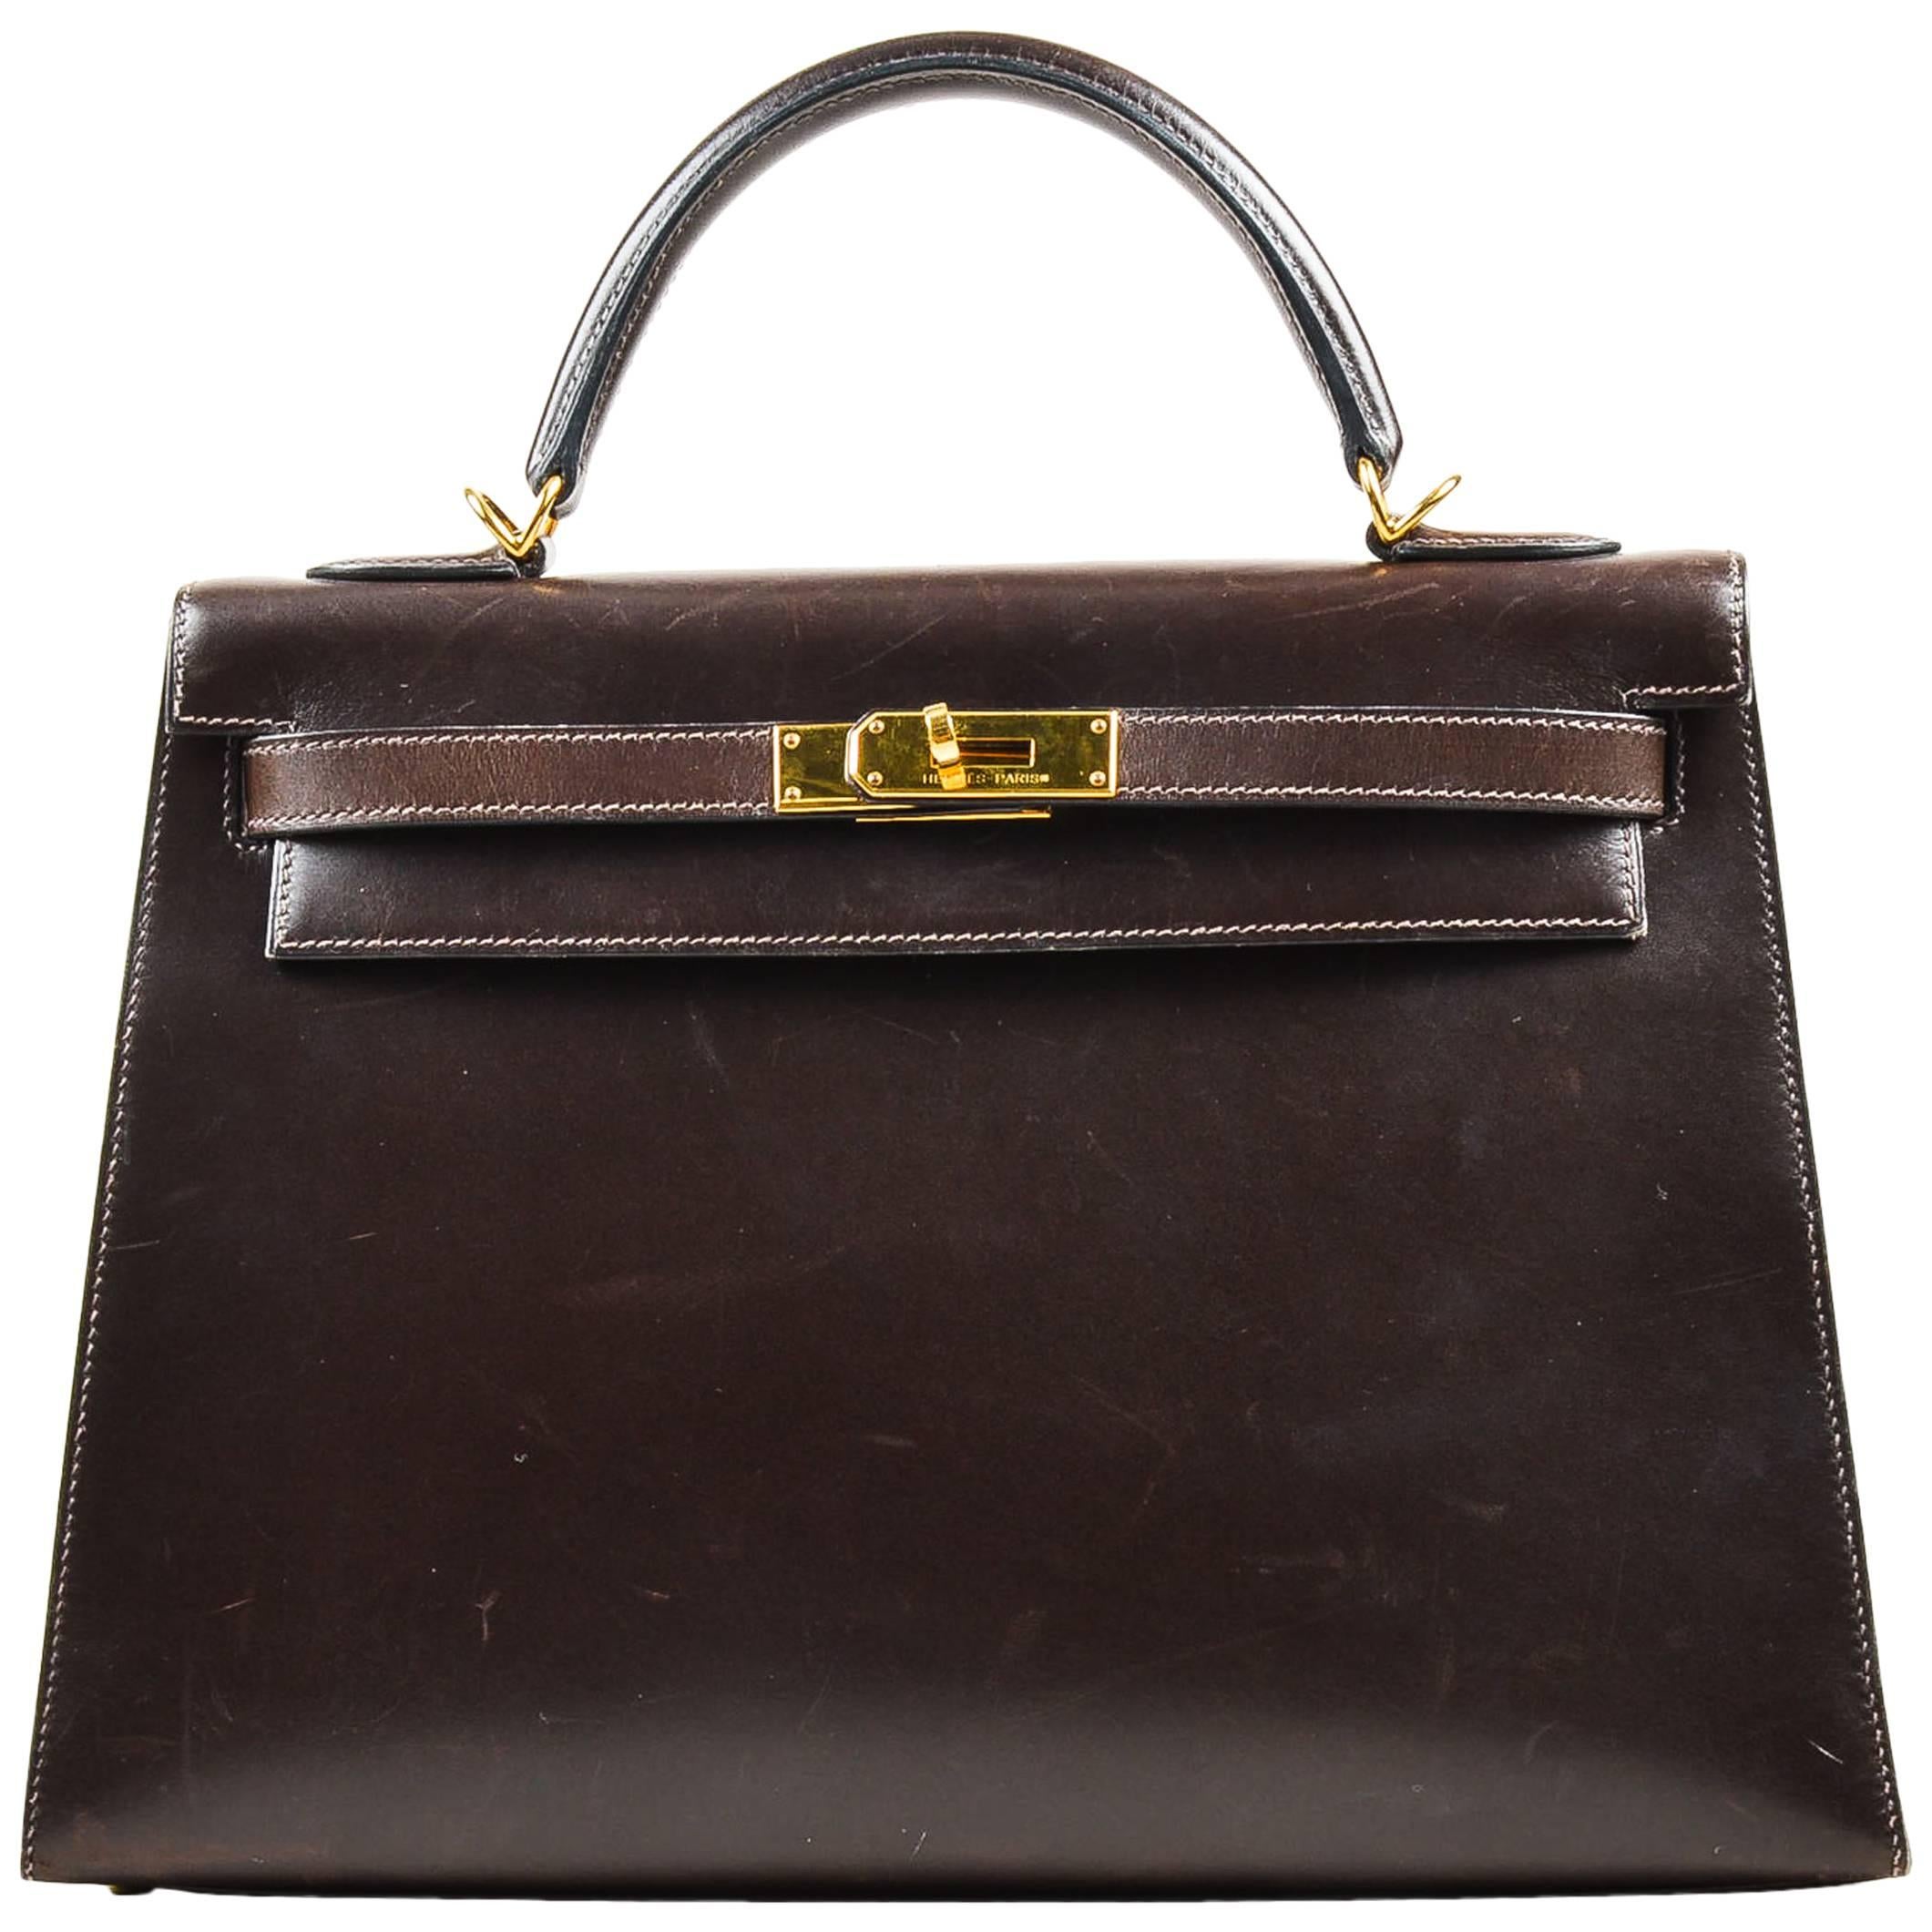 Hermes Brown Box Calf Leather Gold Tone Sellier "Kelly" 32 cm Bag For Sale